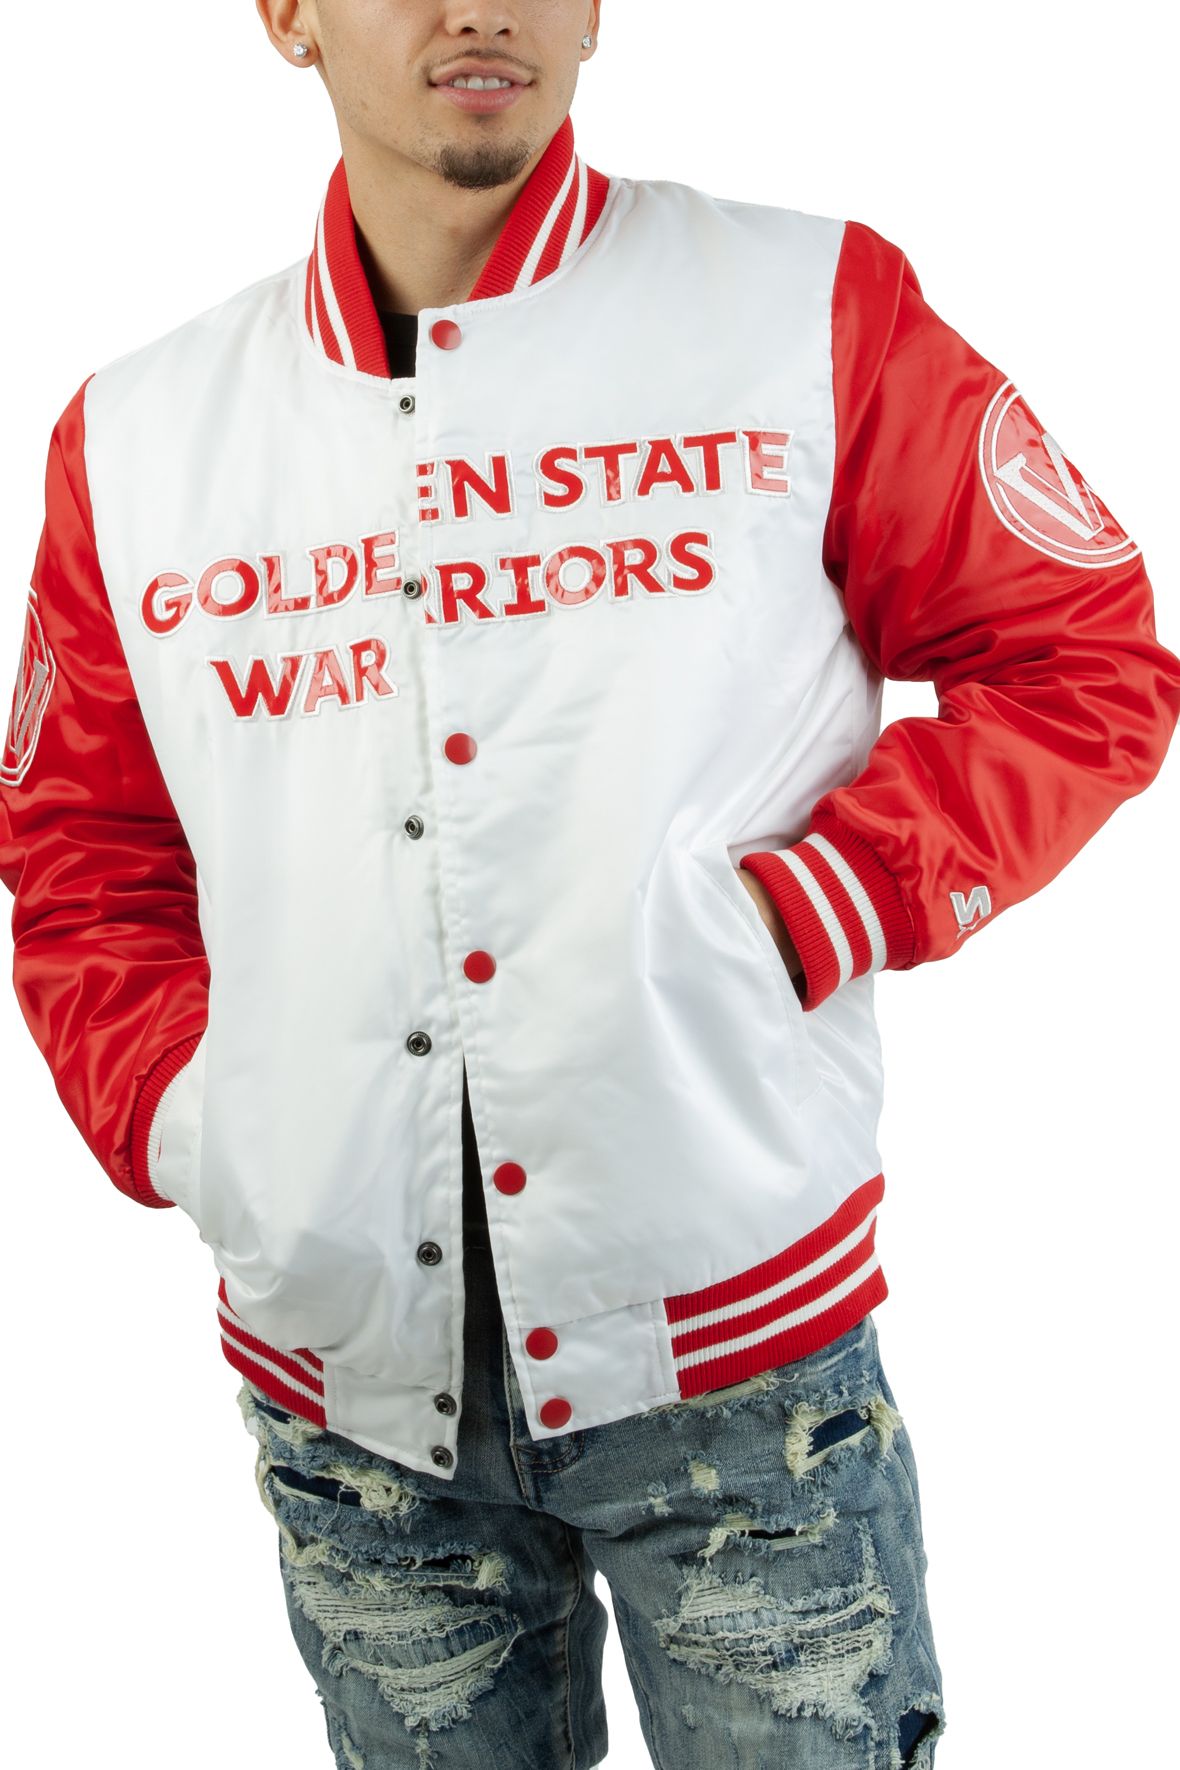 warriors championship jacket white and gold